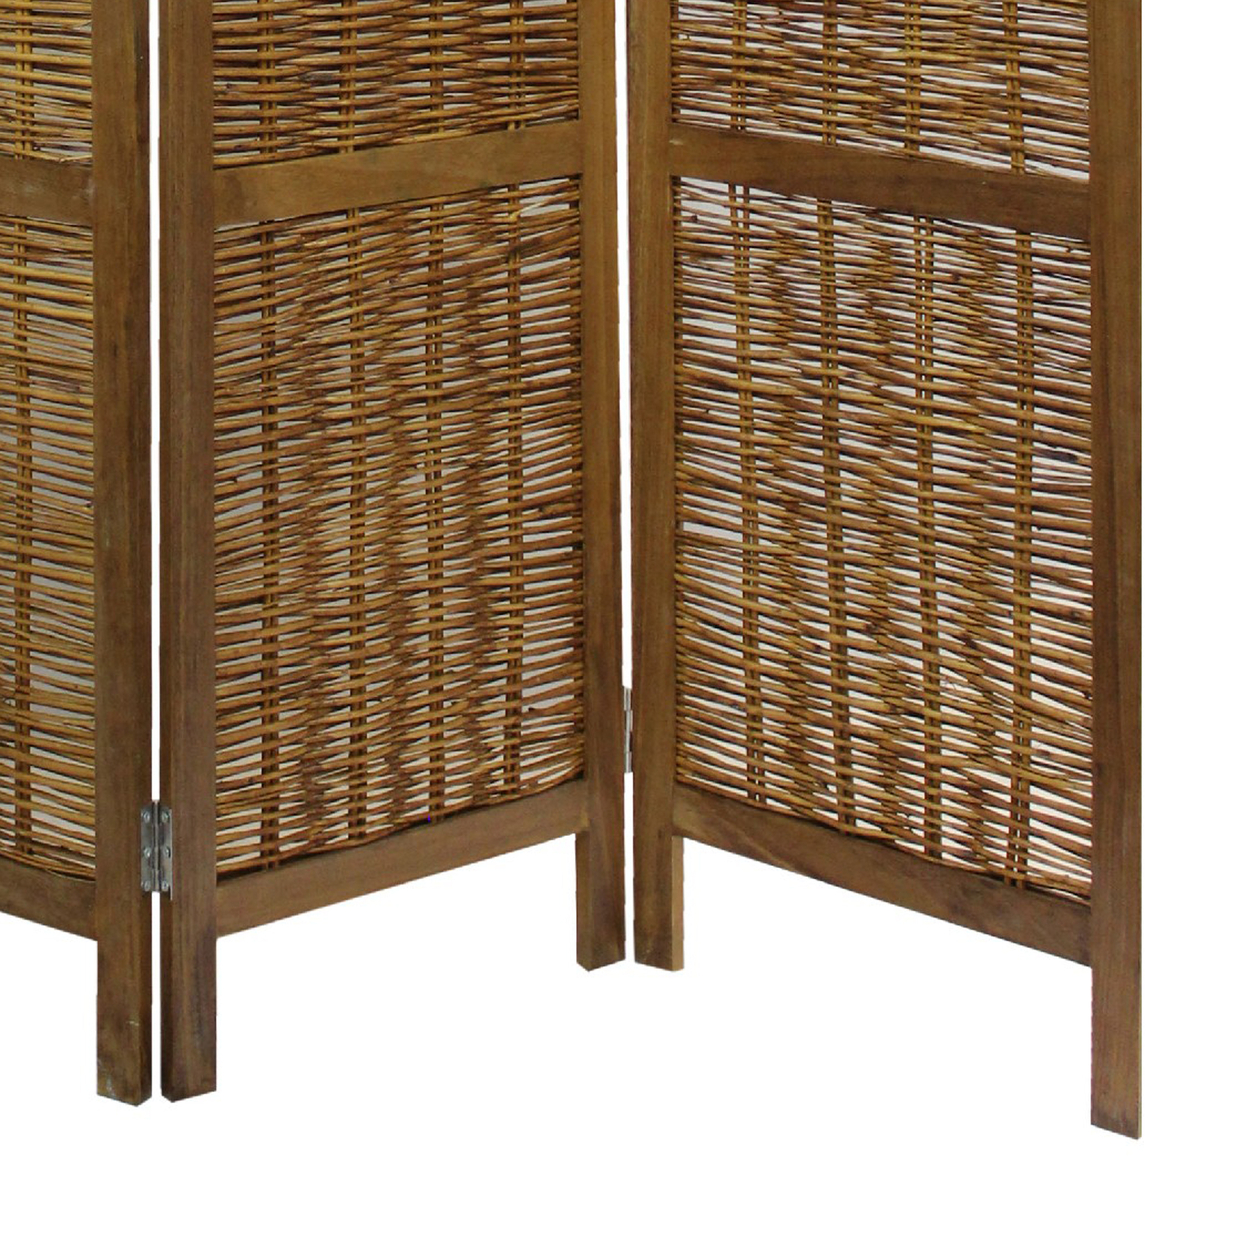 68 Inch Cottage Style 4 Panel Screen Room Divider, Willow Weaving, Brown- Saltoro Sherpi